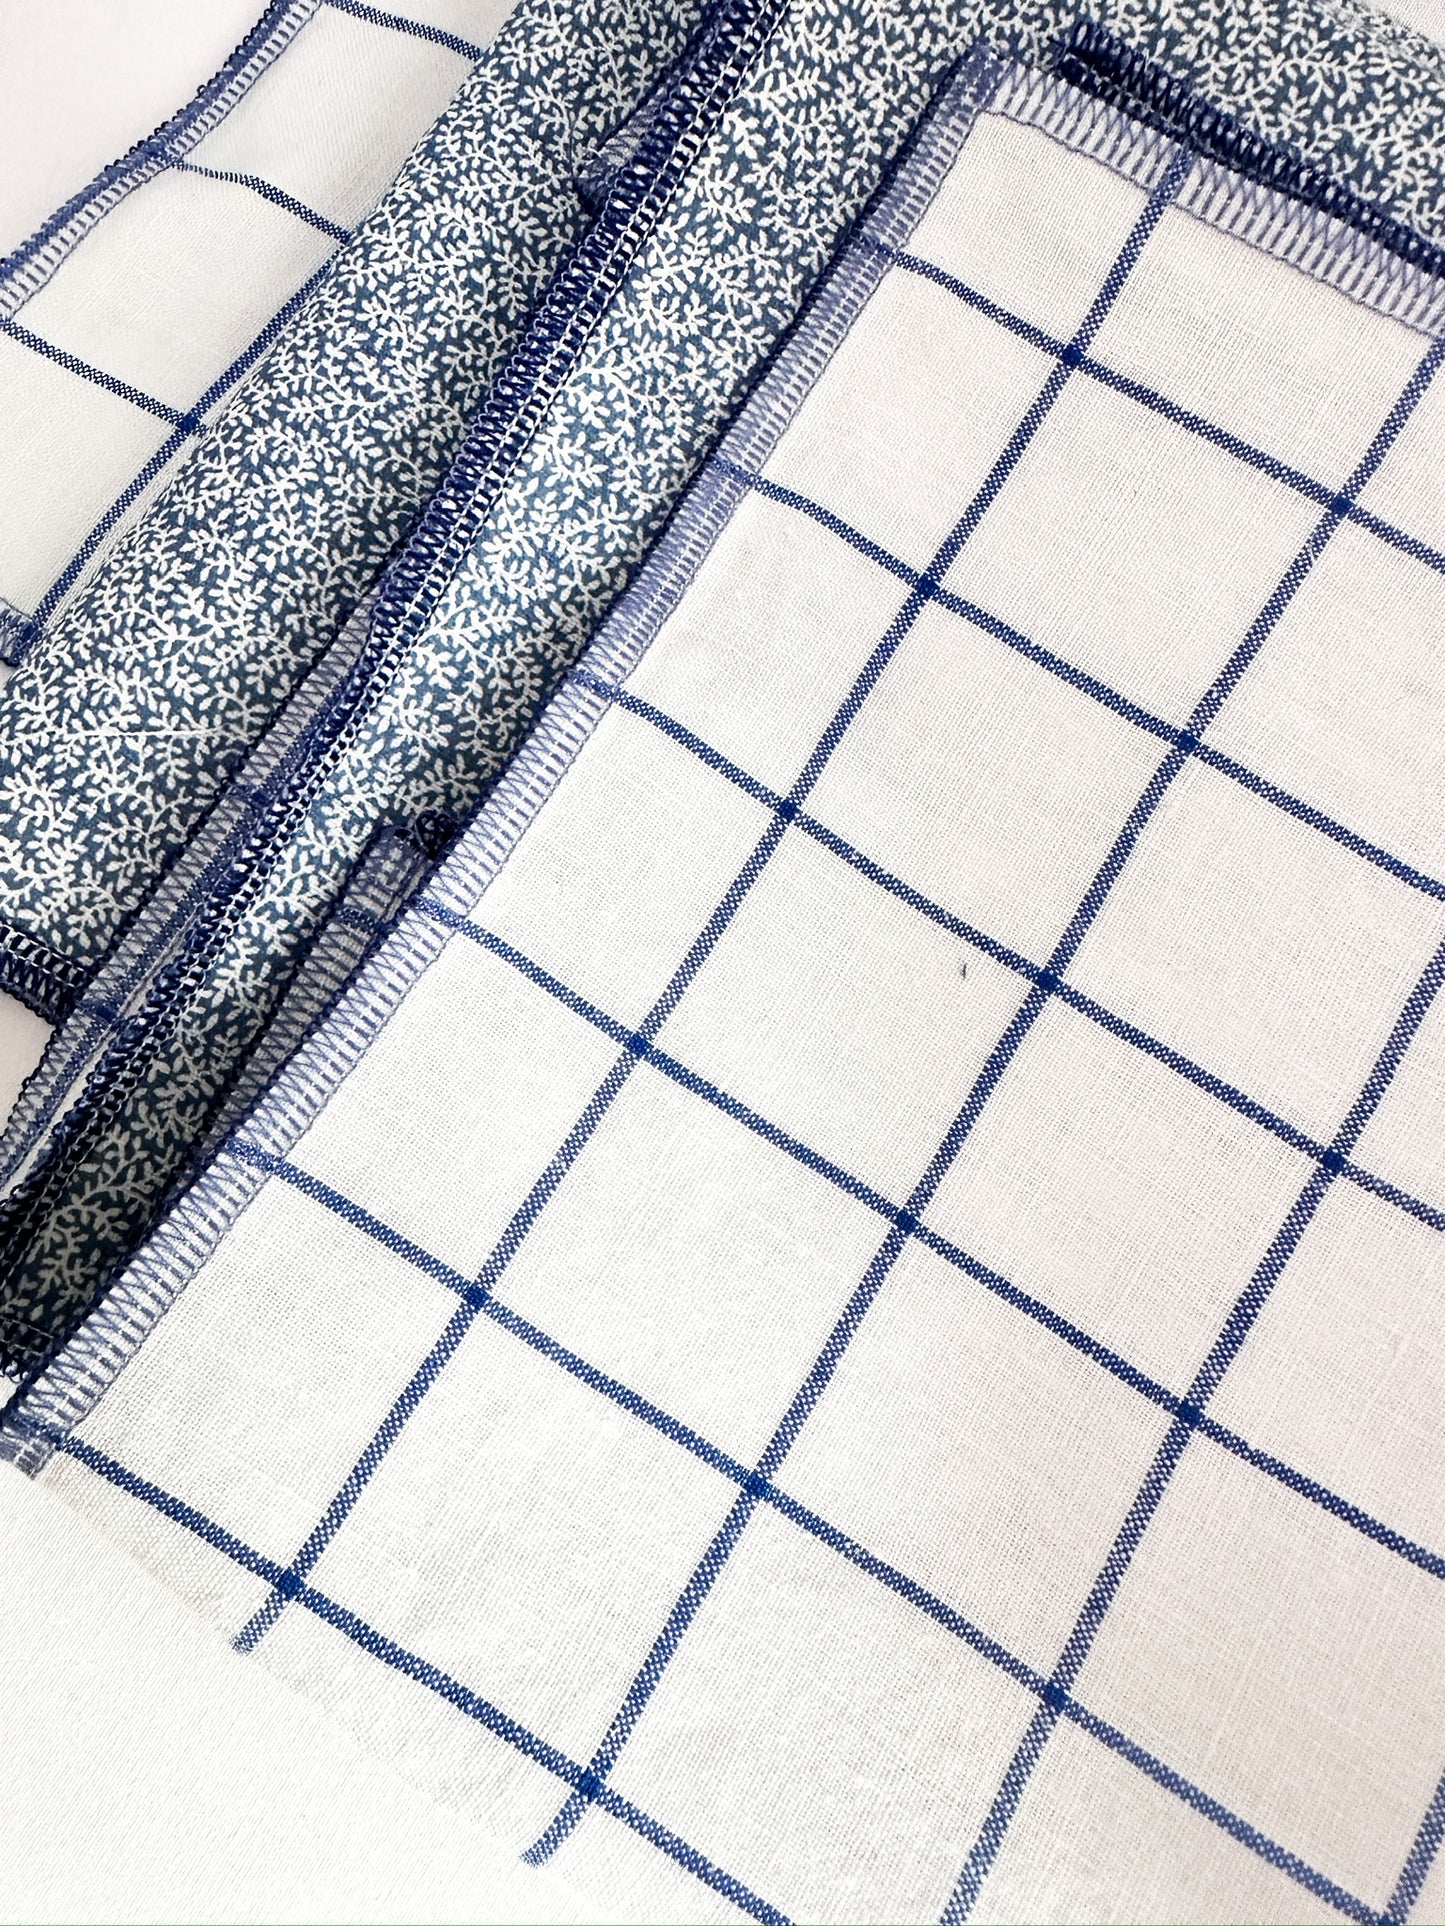 Blue and White Check and Dainty Vines Reversible Napkins